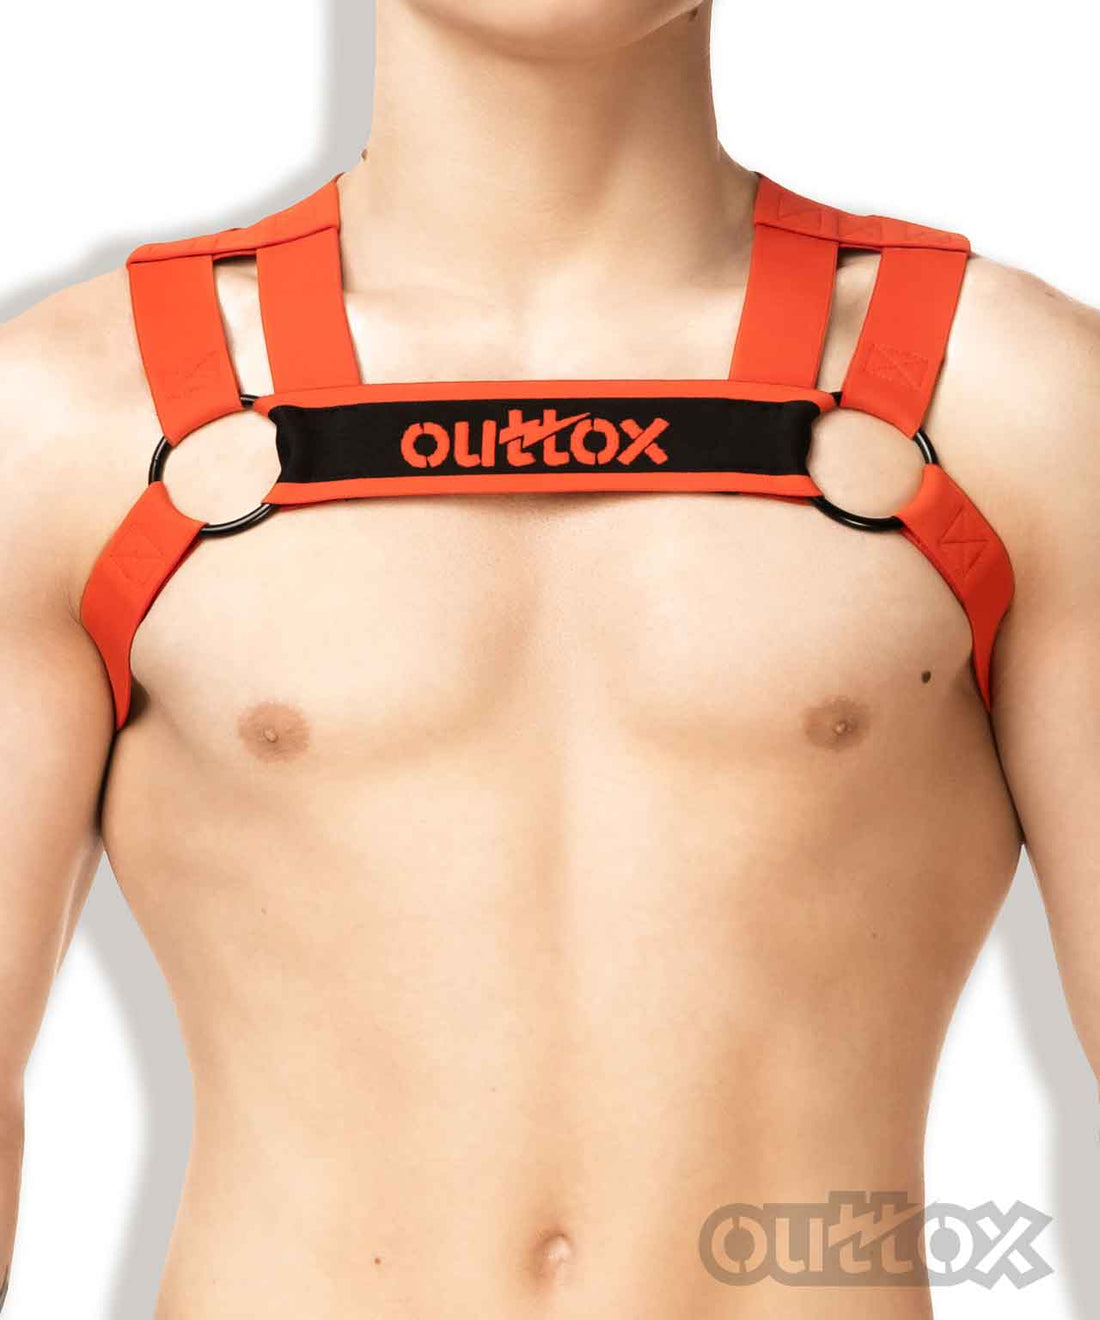 Outtox. Bulldog harness. Red